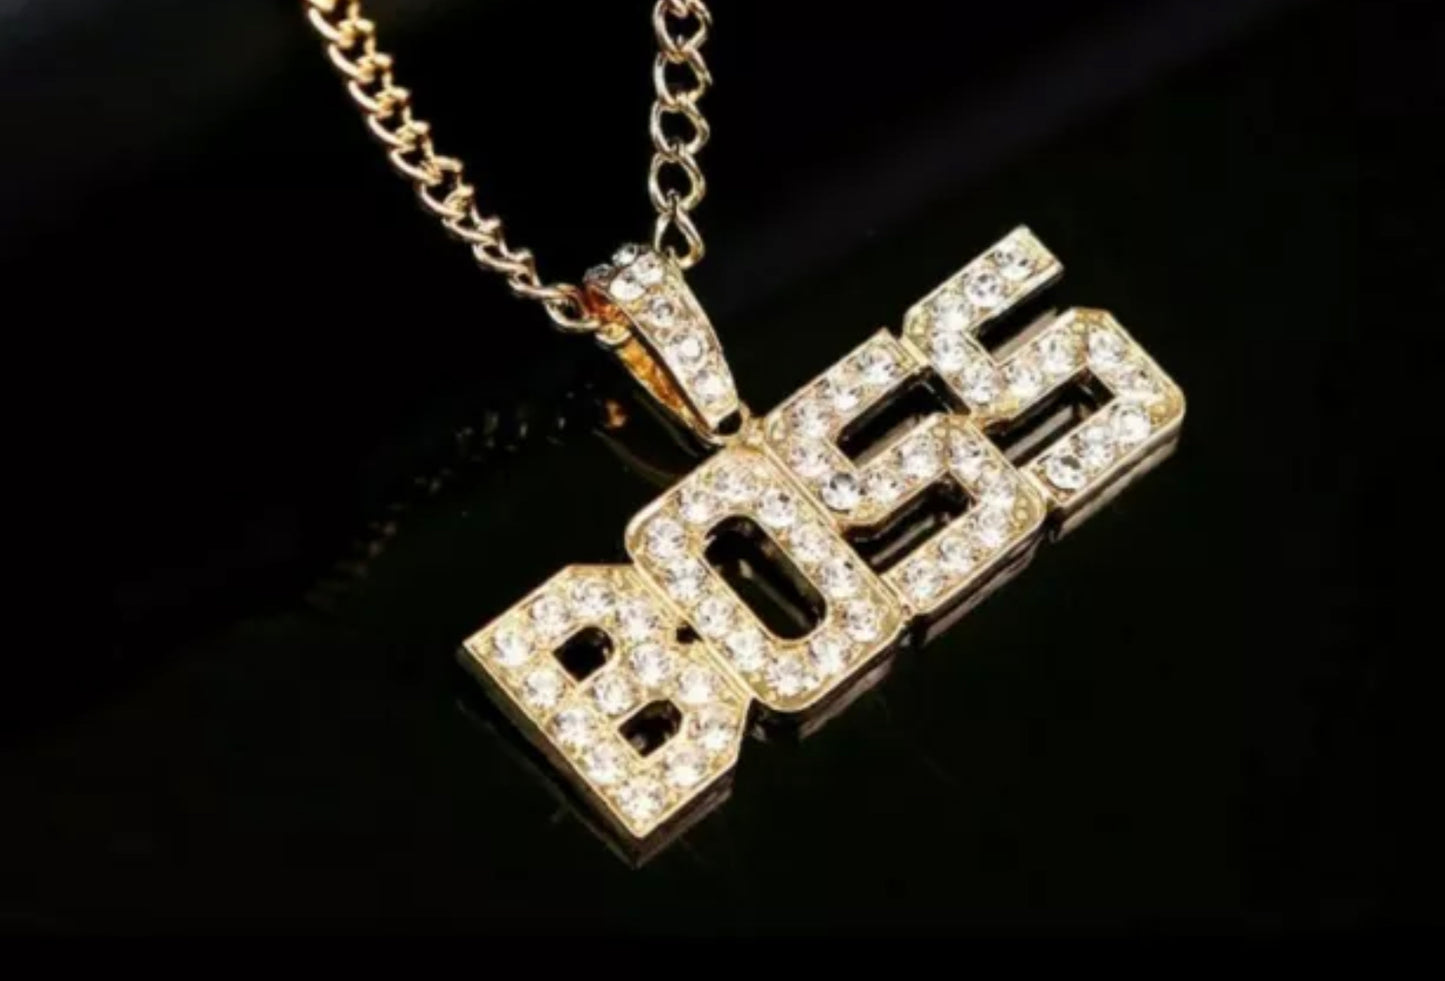 Gold Boss chain necklace